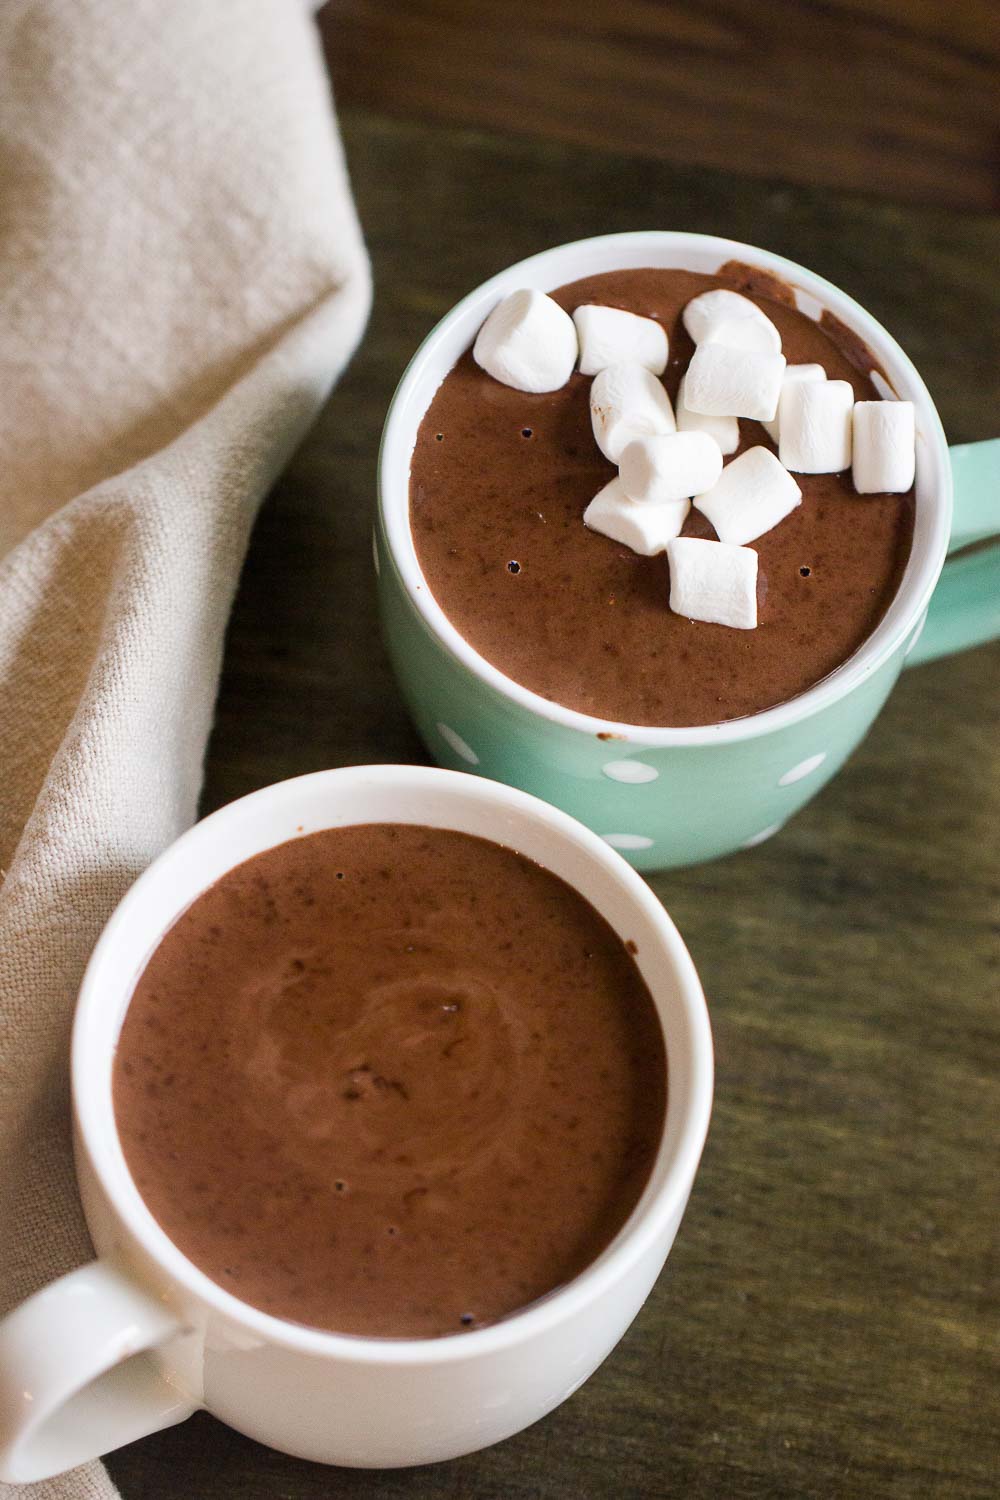 No matter where you live, you can easily make and enjoy this French hot chocolate within minutes. Forget the powders, the mixes, the annoying little clumps, this classic dark hot chocolate contains just 2 ingredients to create the perfect balance of creaminess.